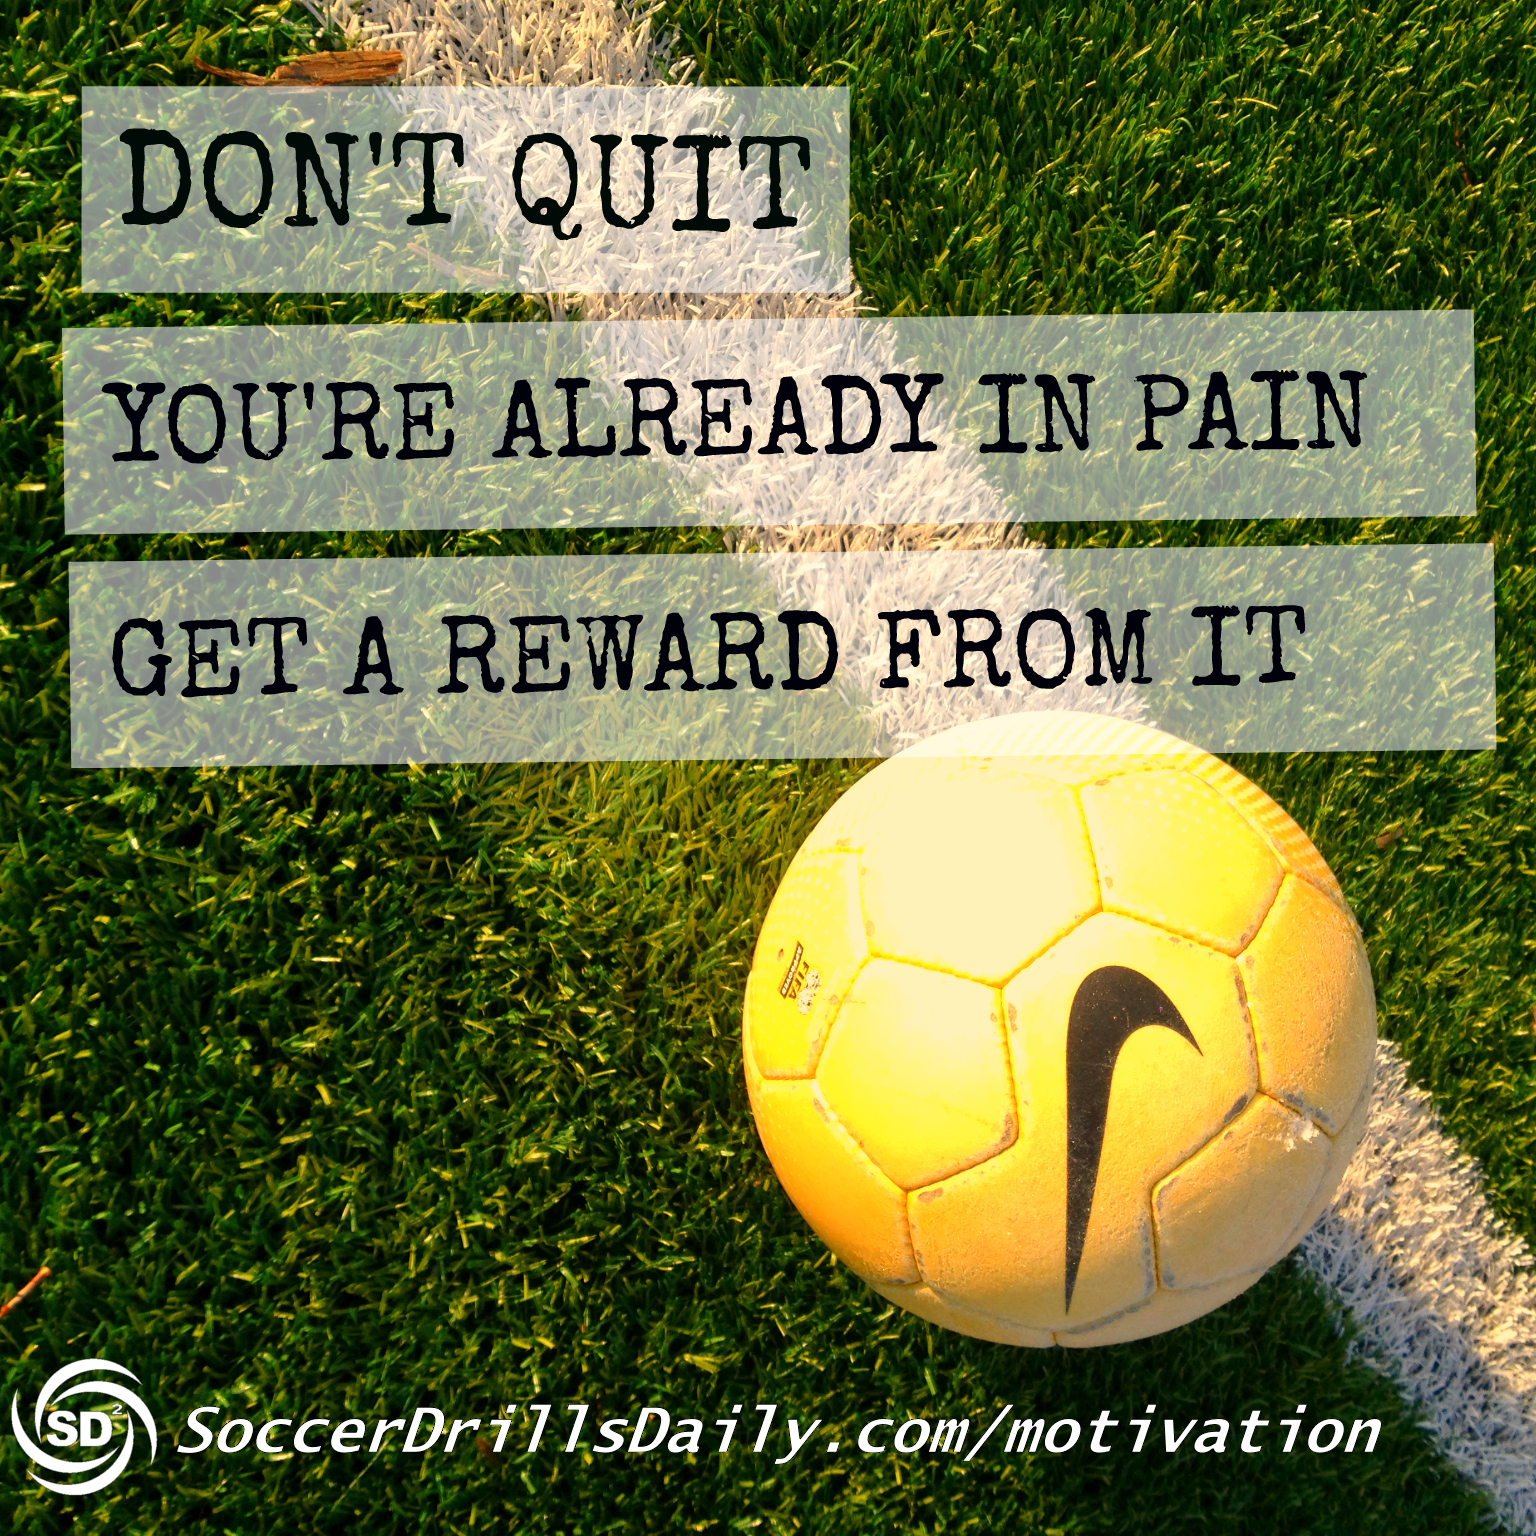 Soccer Motivation – Don’t Quit. You’re Already In Pain. Get a Reward From It!